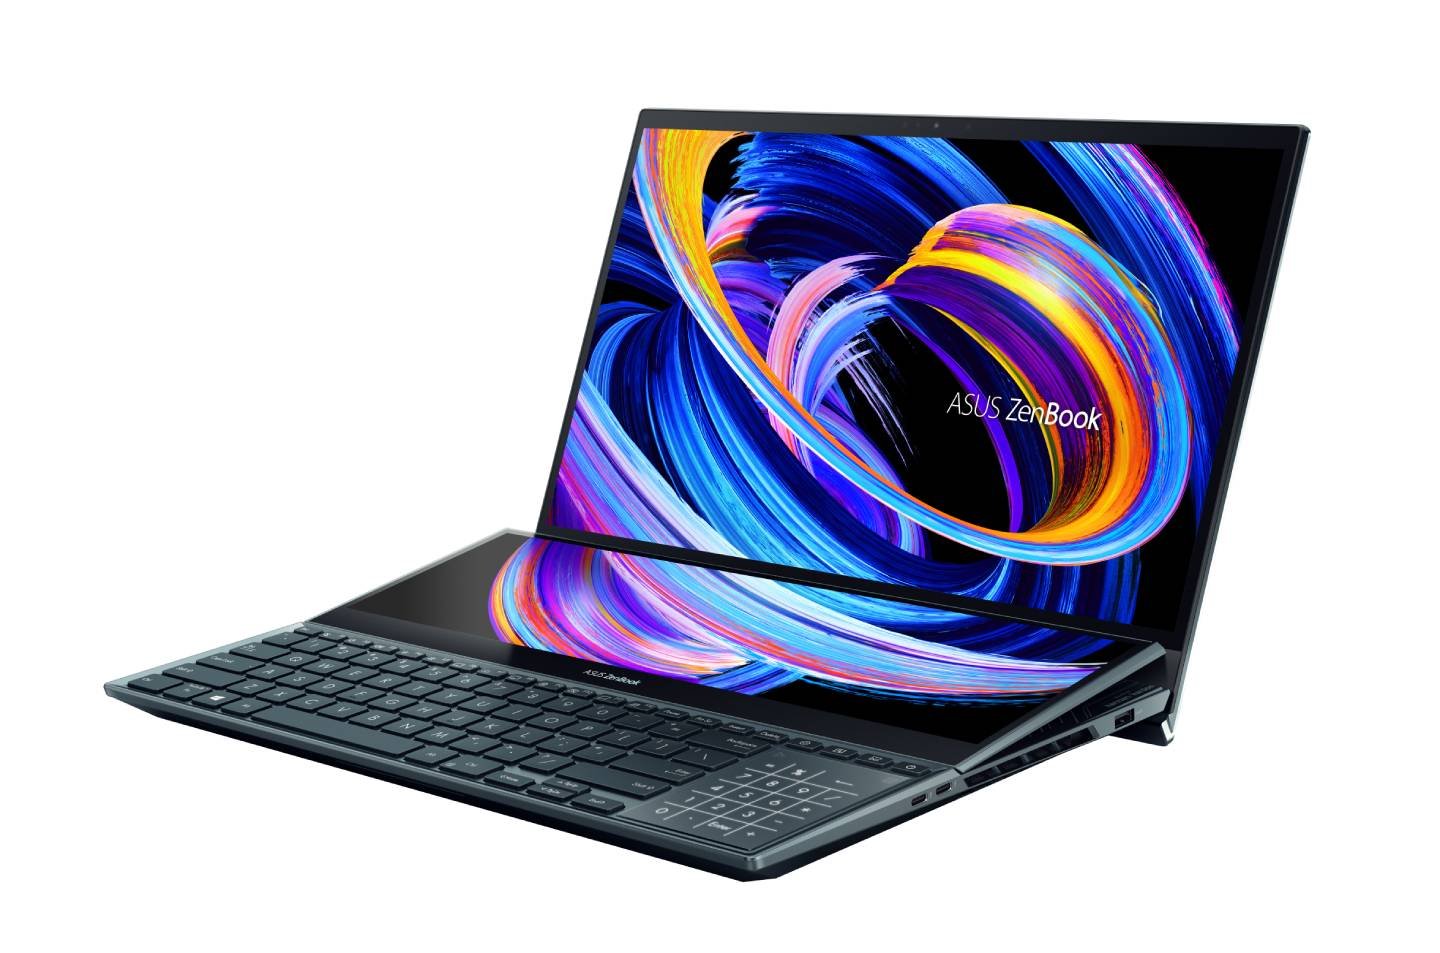 ASUS debuts new laptops from the ZenBook, VivoBook, and TUF series